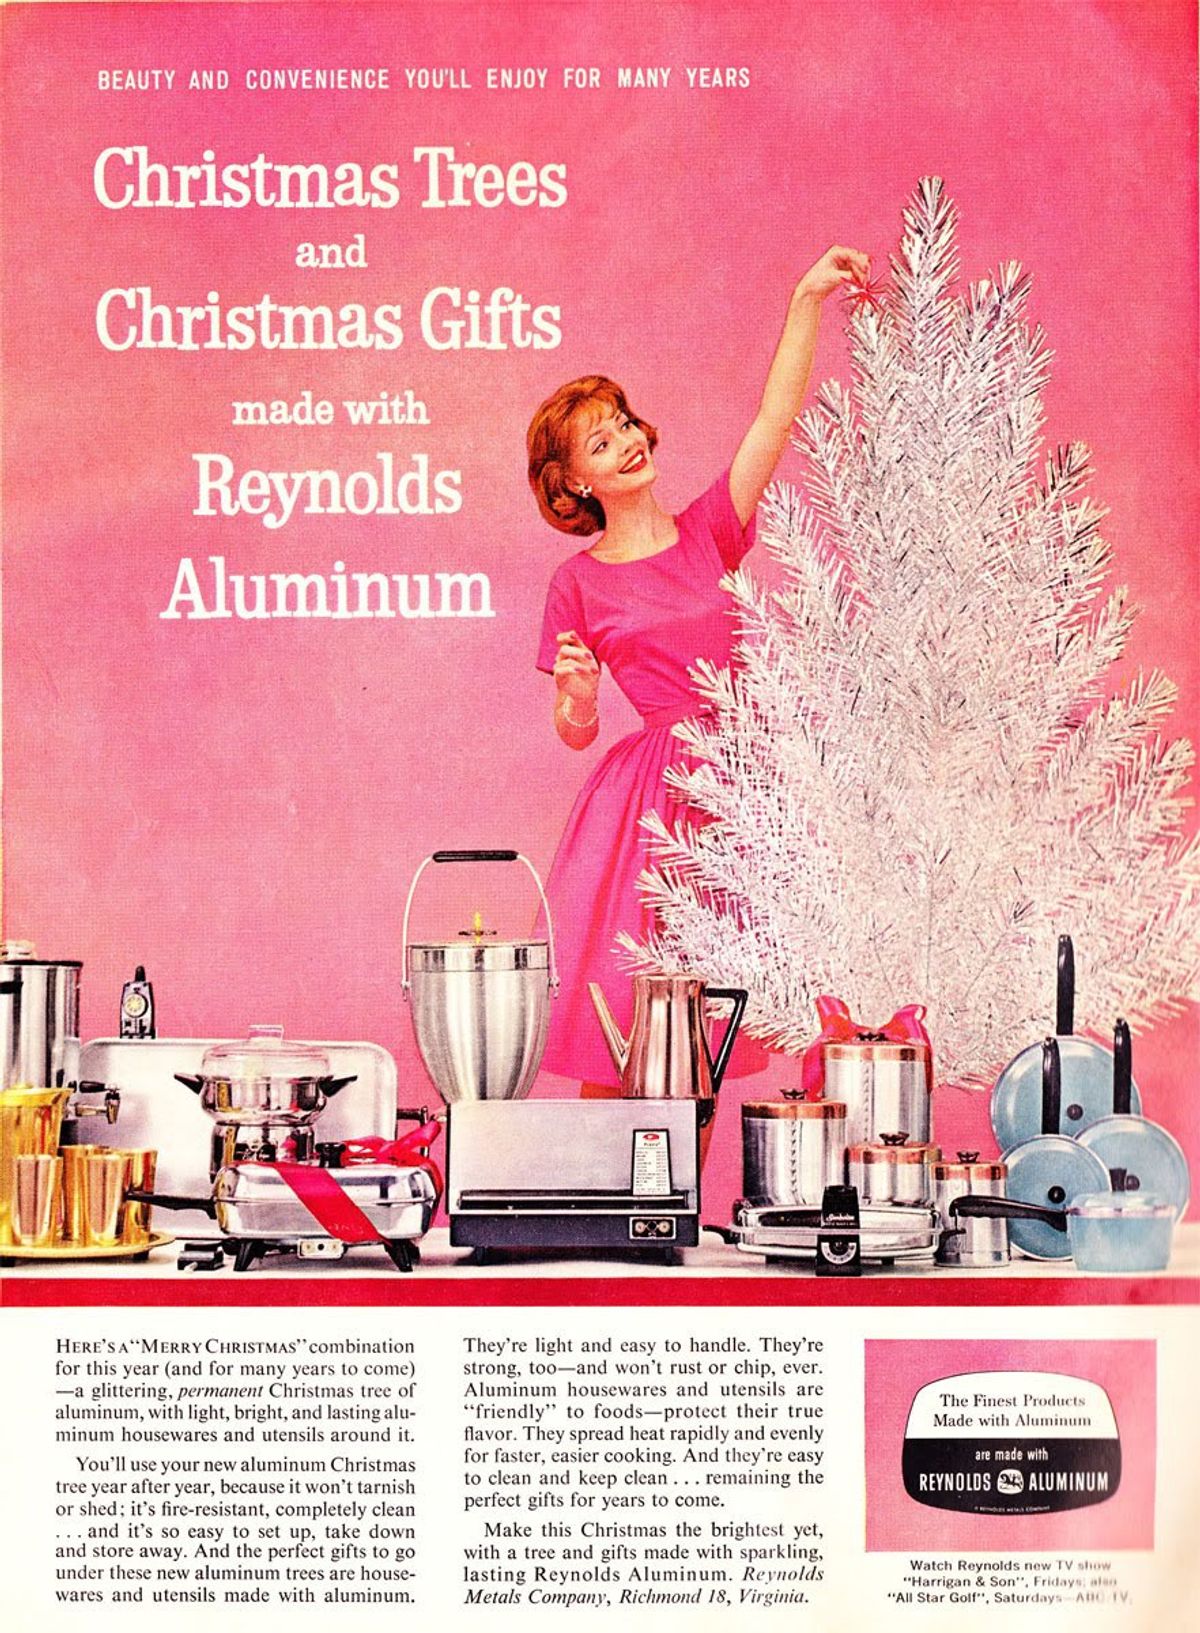 Holidays Through The Decades: Christmas In The 1960's